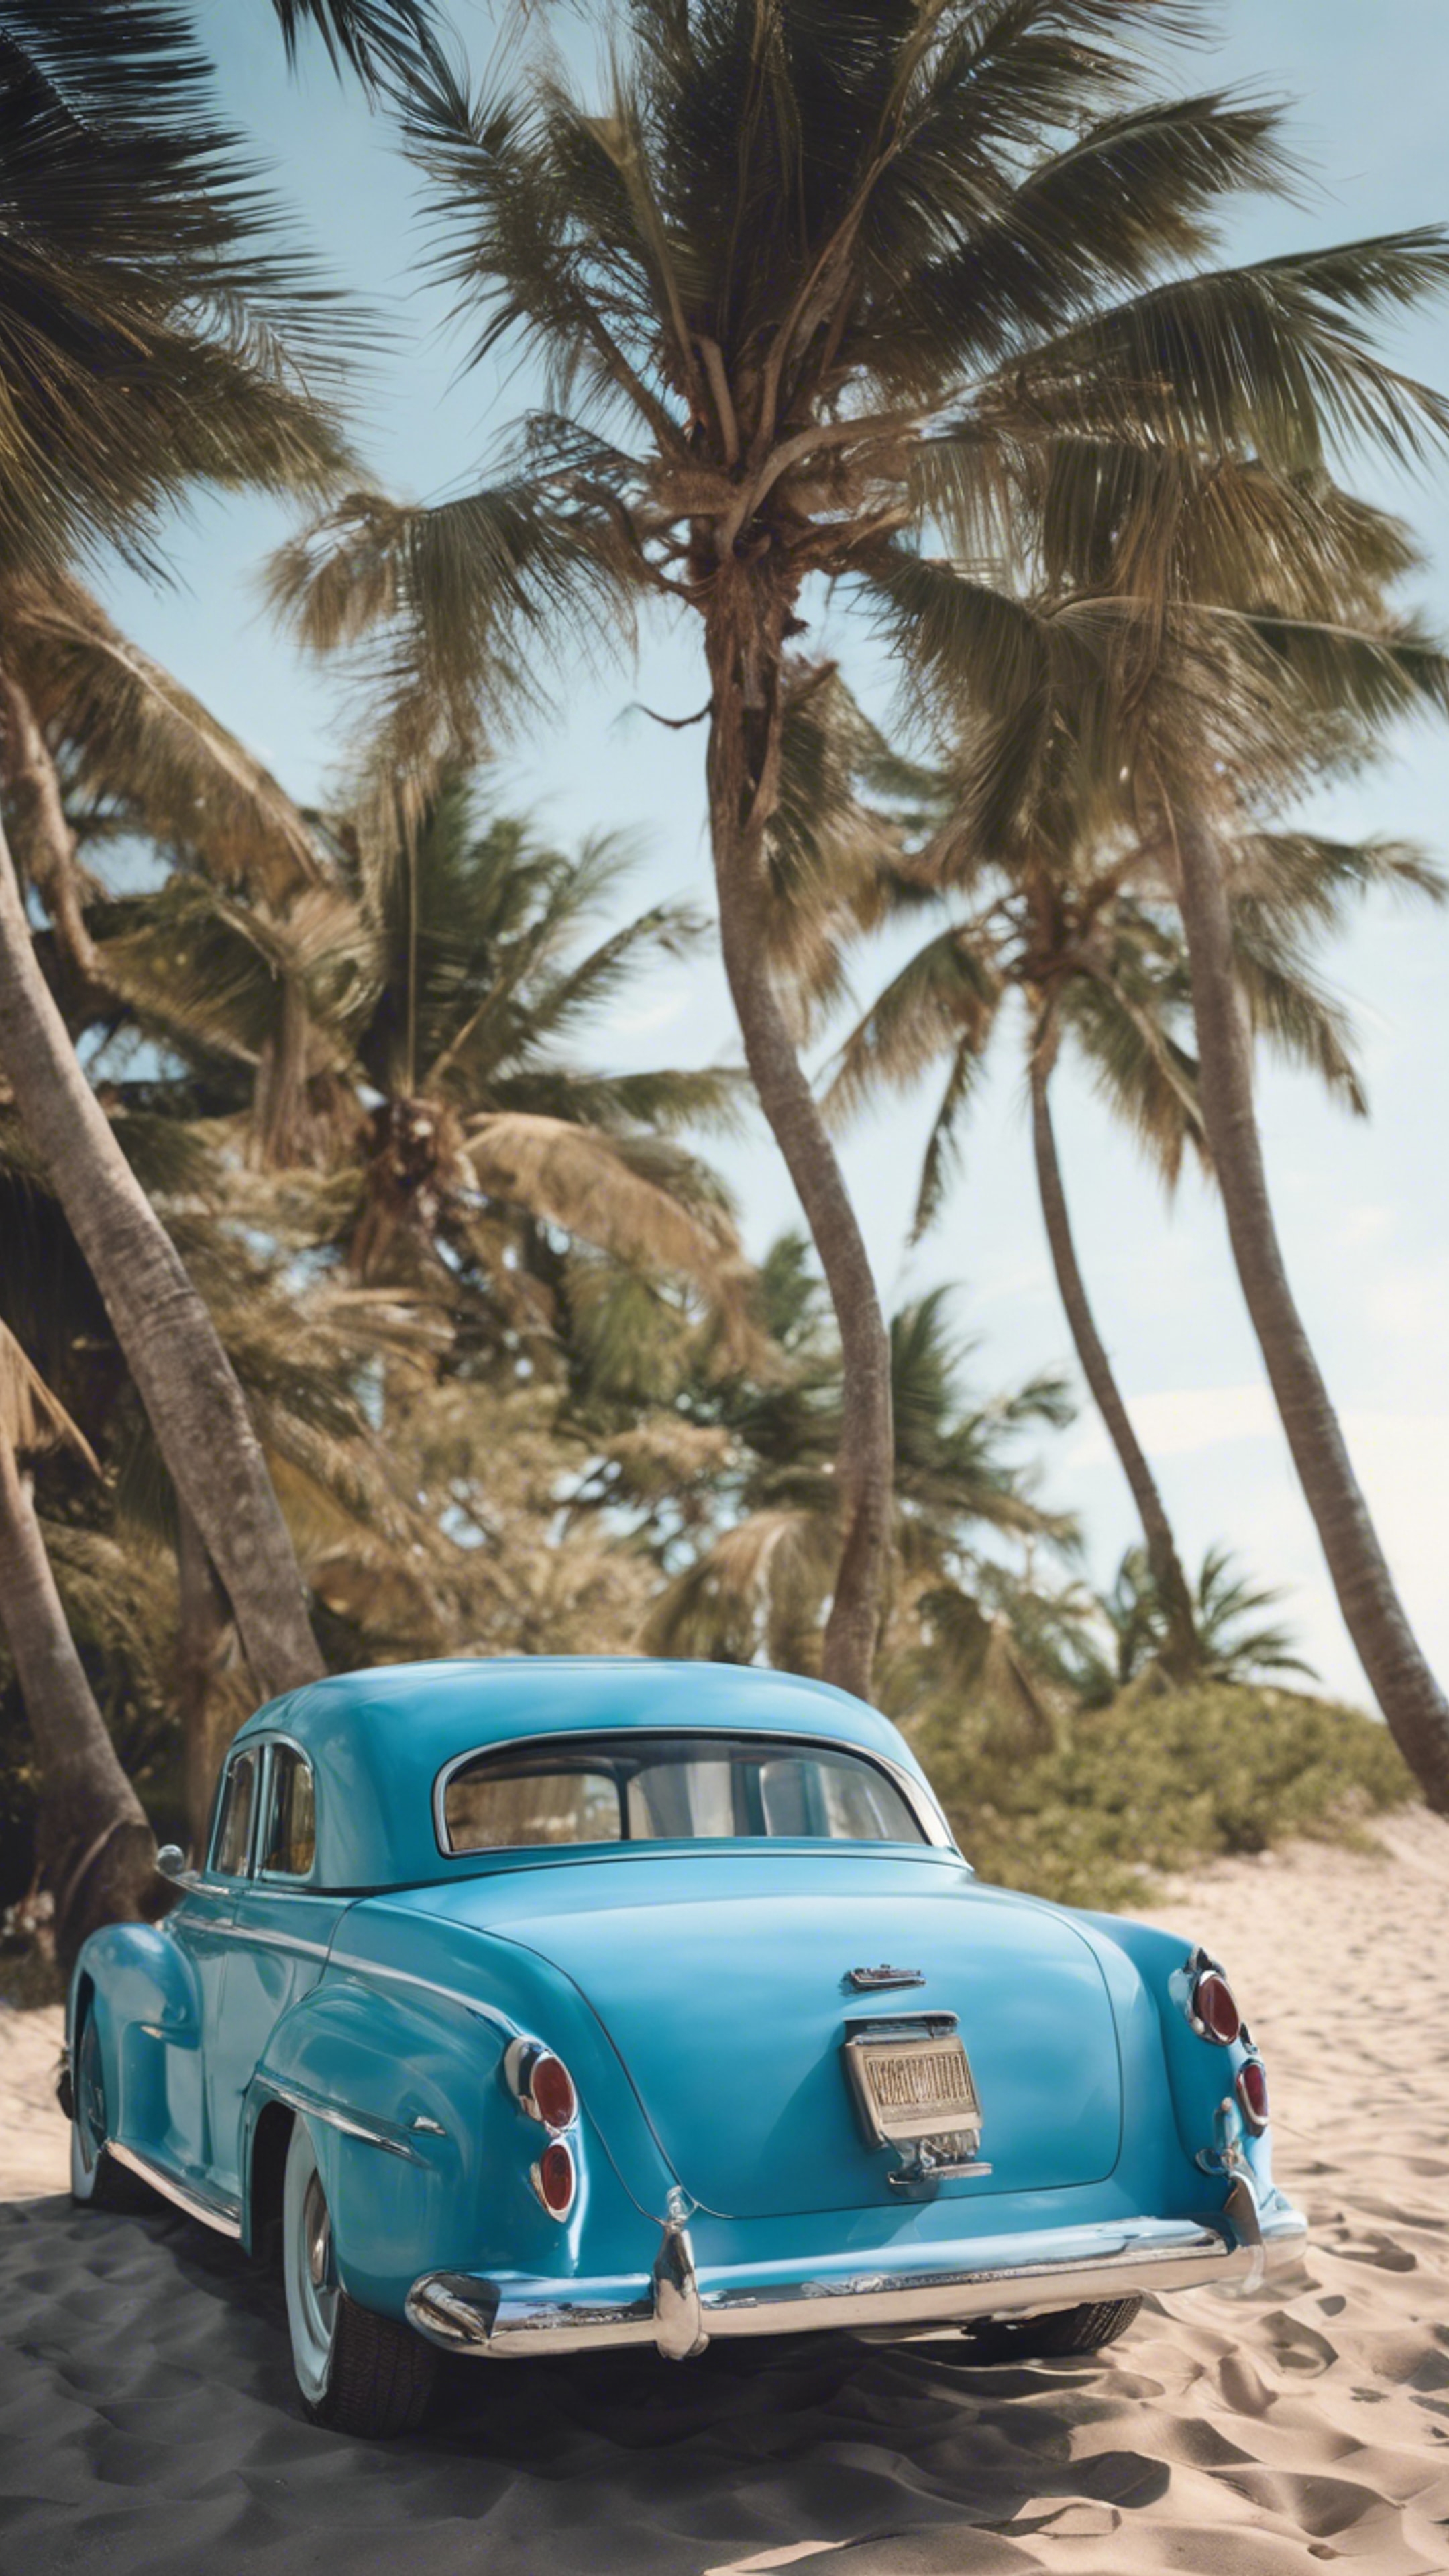 A vintage car painted in cool blue, parked by the beach ផ្ទាំង​រូបភាព[7559f4037ca44818afd1]